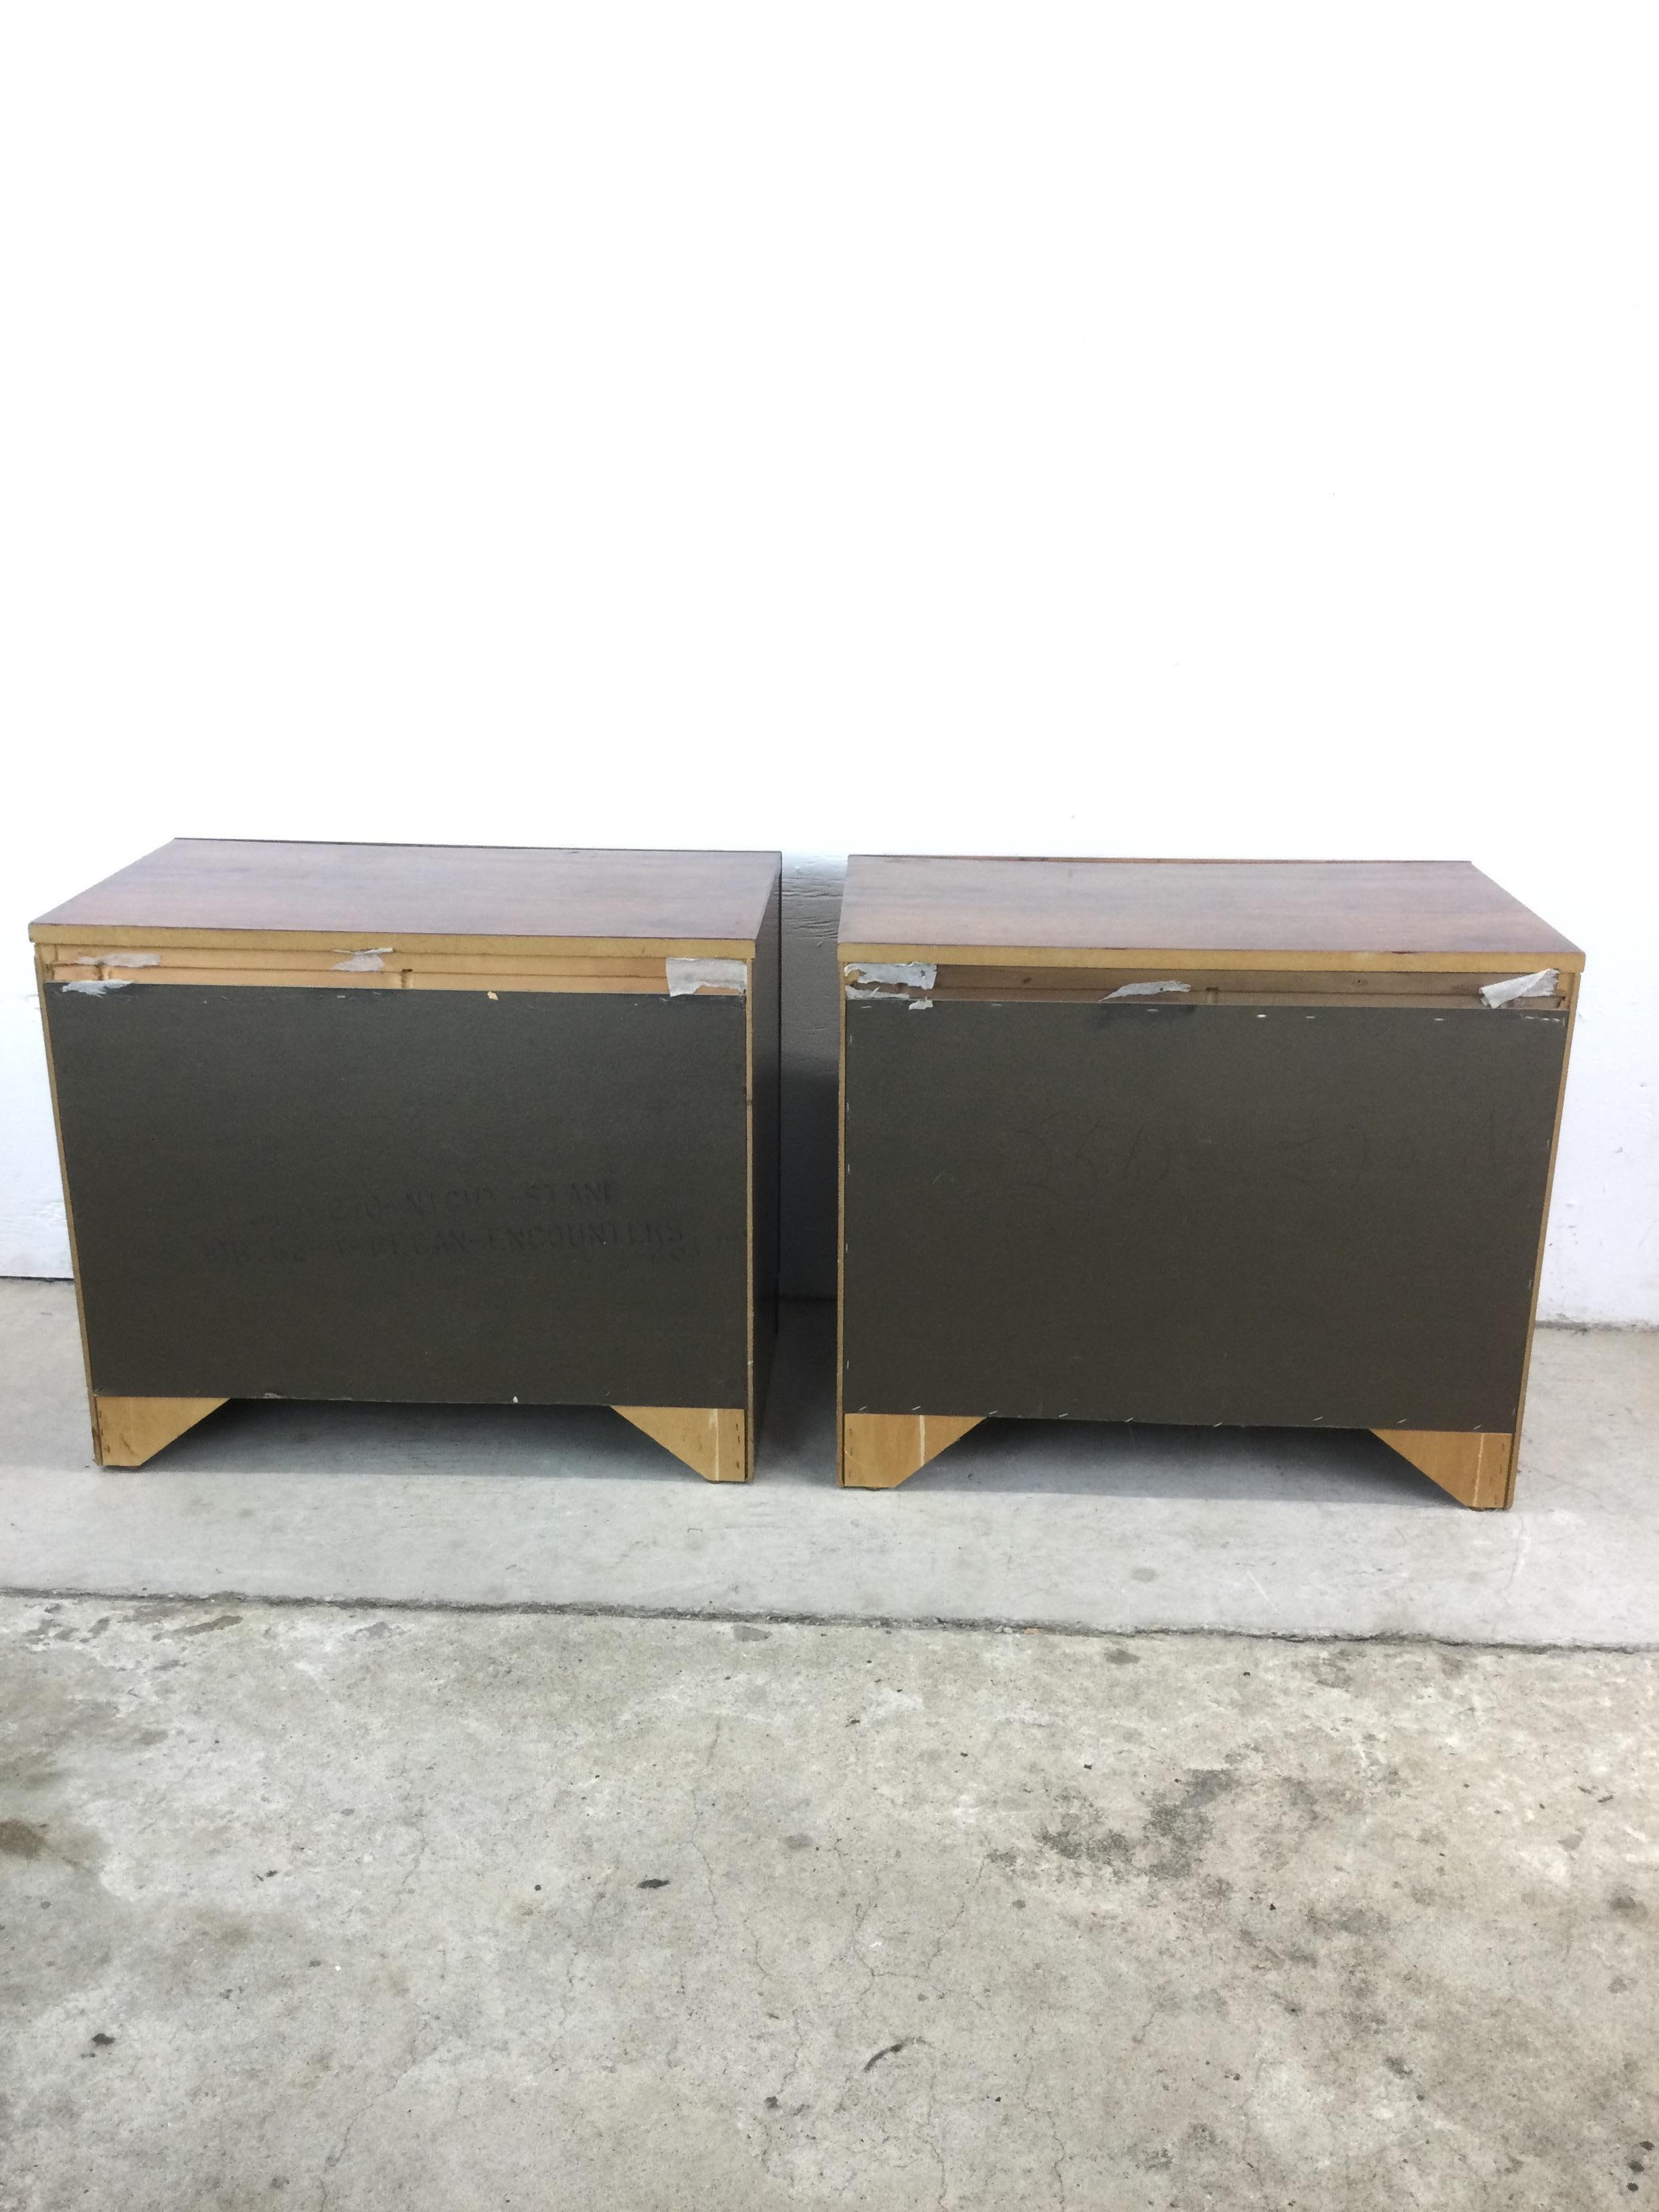 This pair of mid century campaign style nightstands. by Bassett Furniture feature hardwood construction, beautiful oak veneer with original finish, two dovetailed drawers with brass accented trim and hardware, and a plinth style base.

Matching